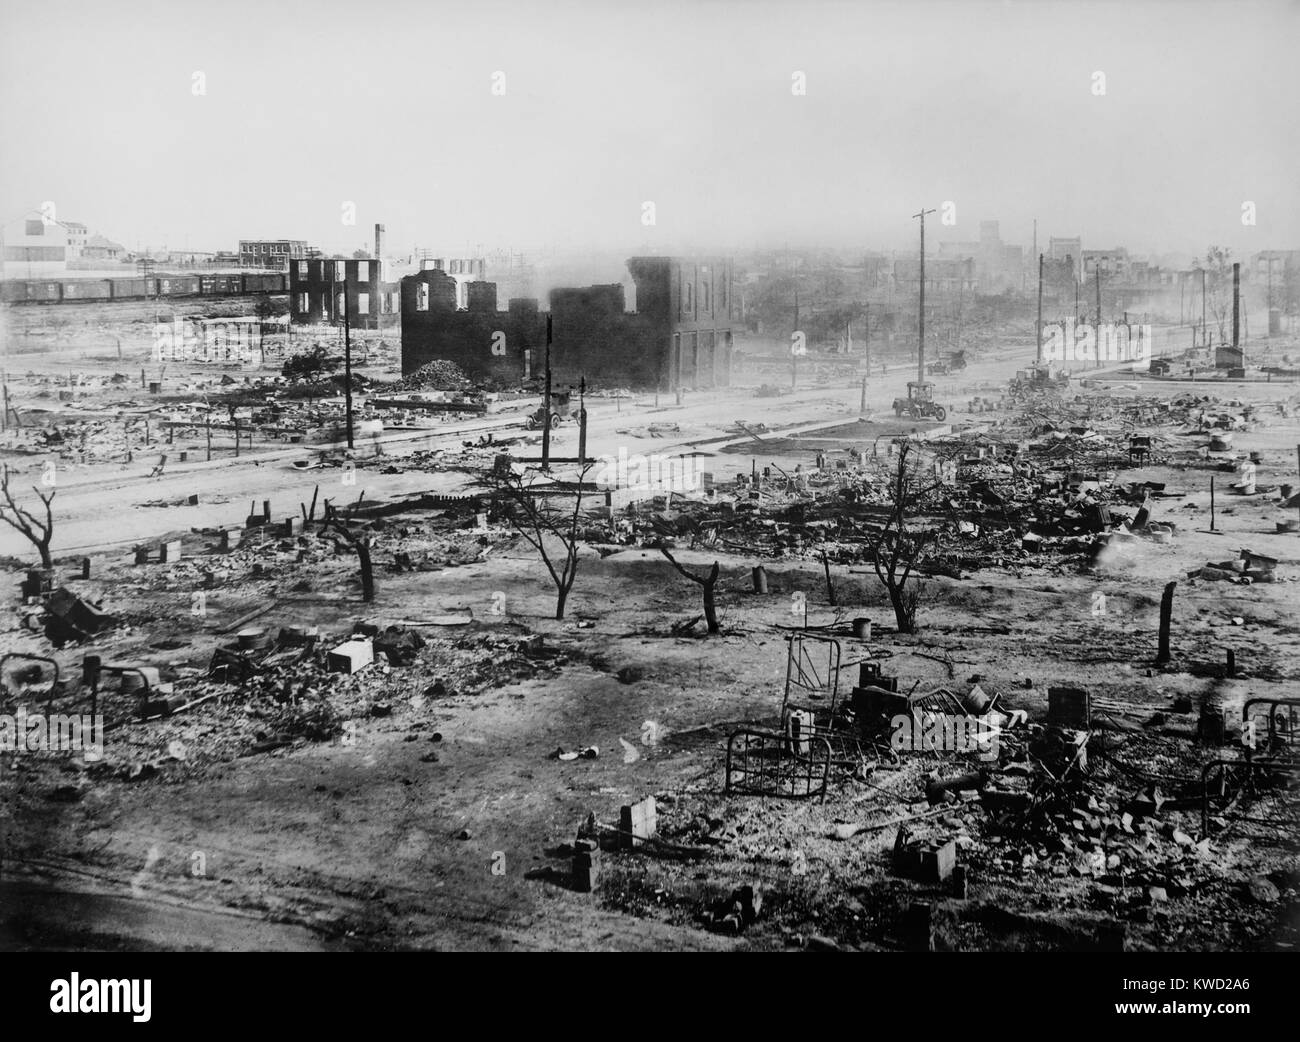 Burnt out ruins of Greenwood, the African American section of Tulsa, Oklahoma, June 1921  (BSLOC 2017 20 81) Stock Photo